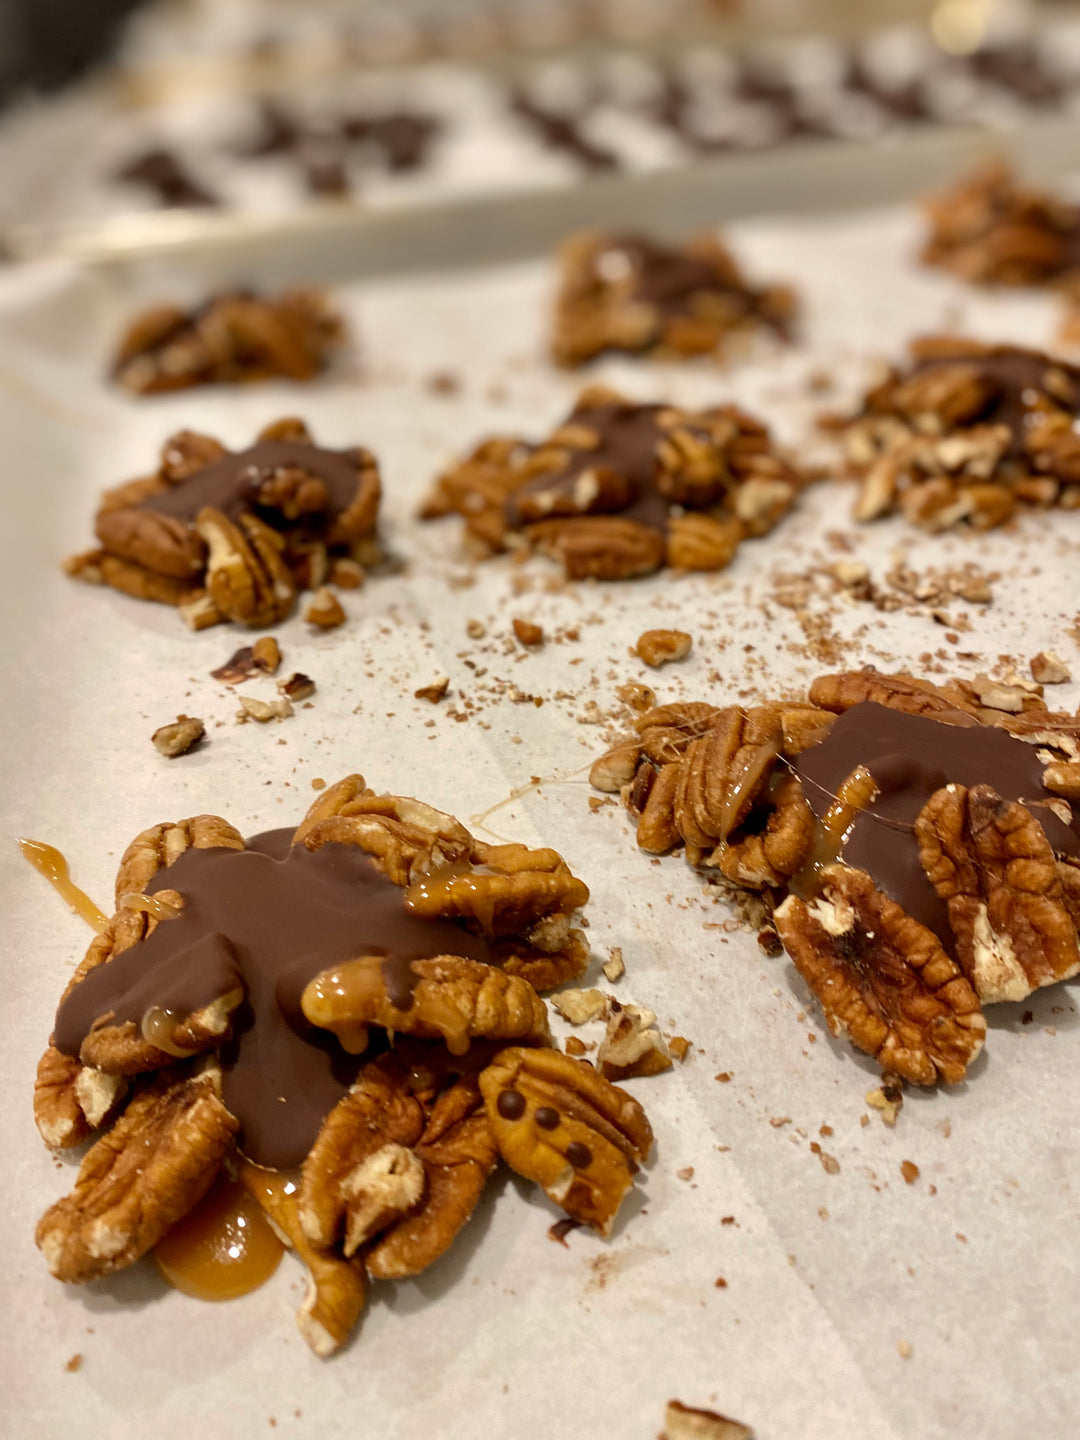 Dark Chocolate Pecan Turtles made by Nantasket Sweets in a gift box